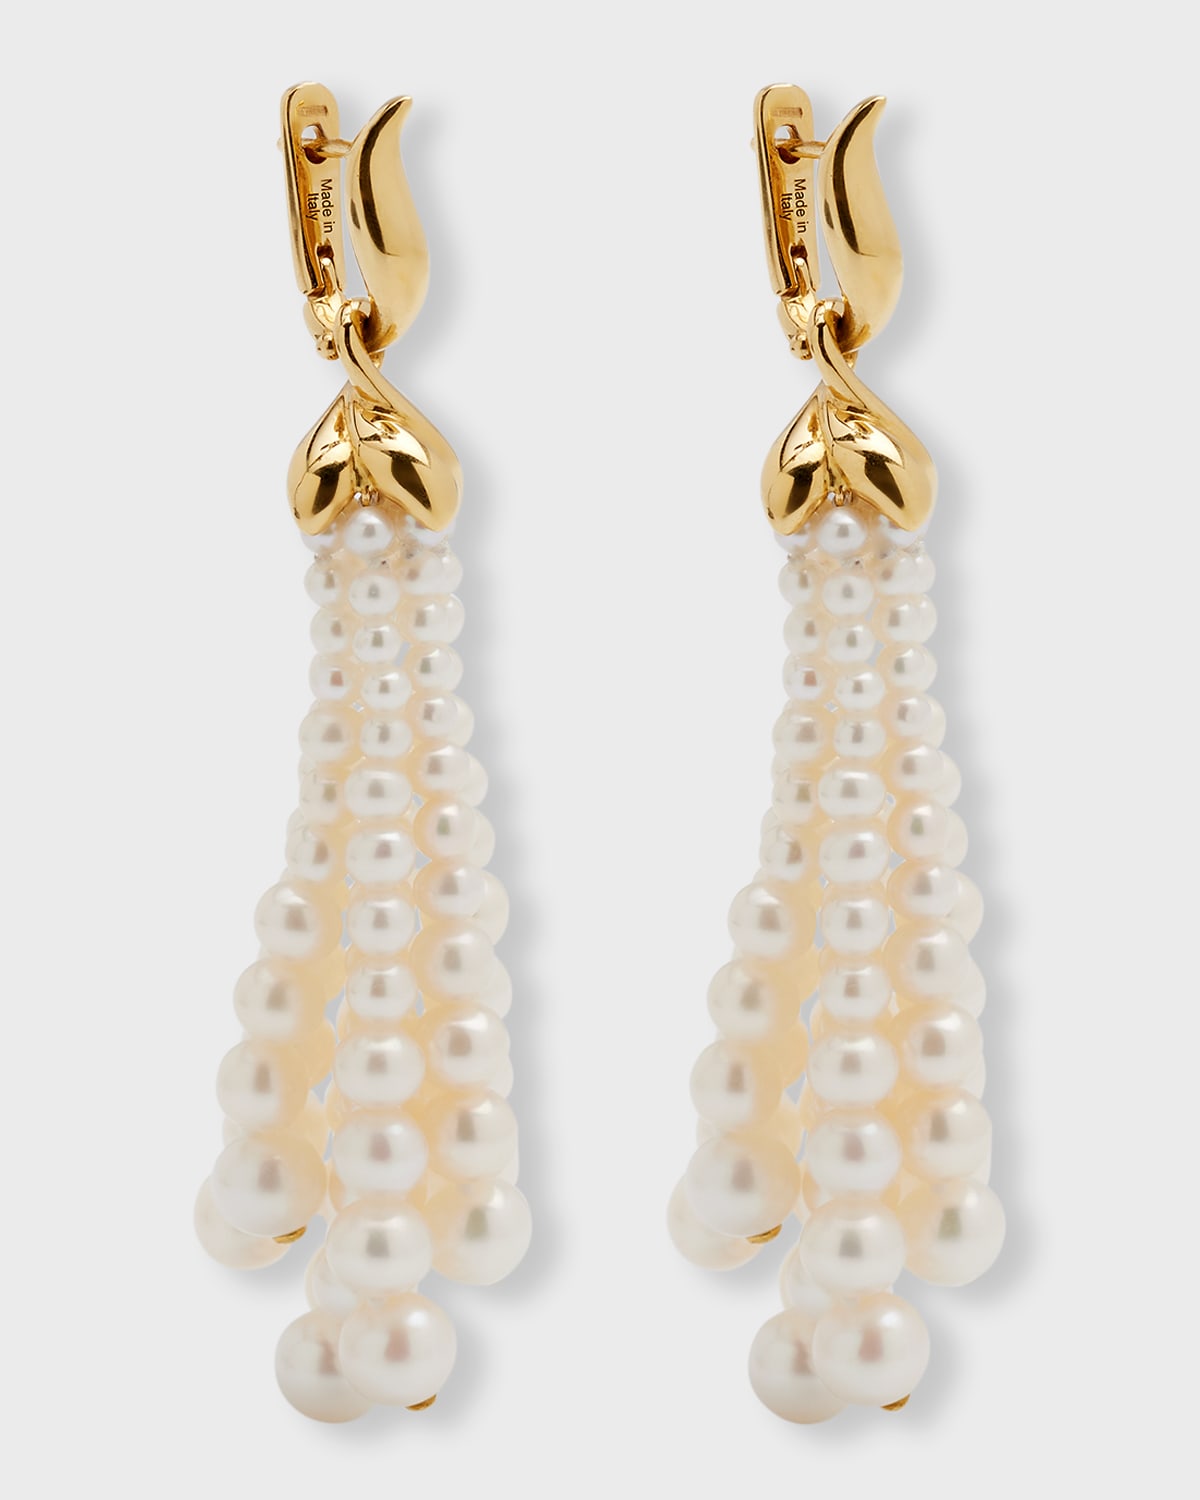 Utopia 18k Yellow Gold Earrings With Freshwater Pearls, 2.5-7mm